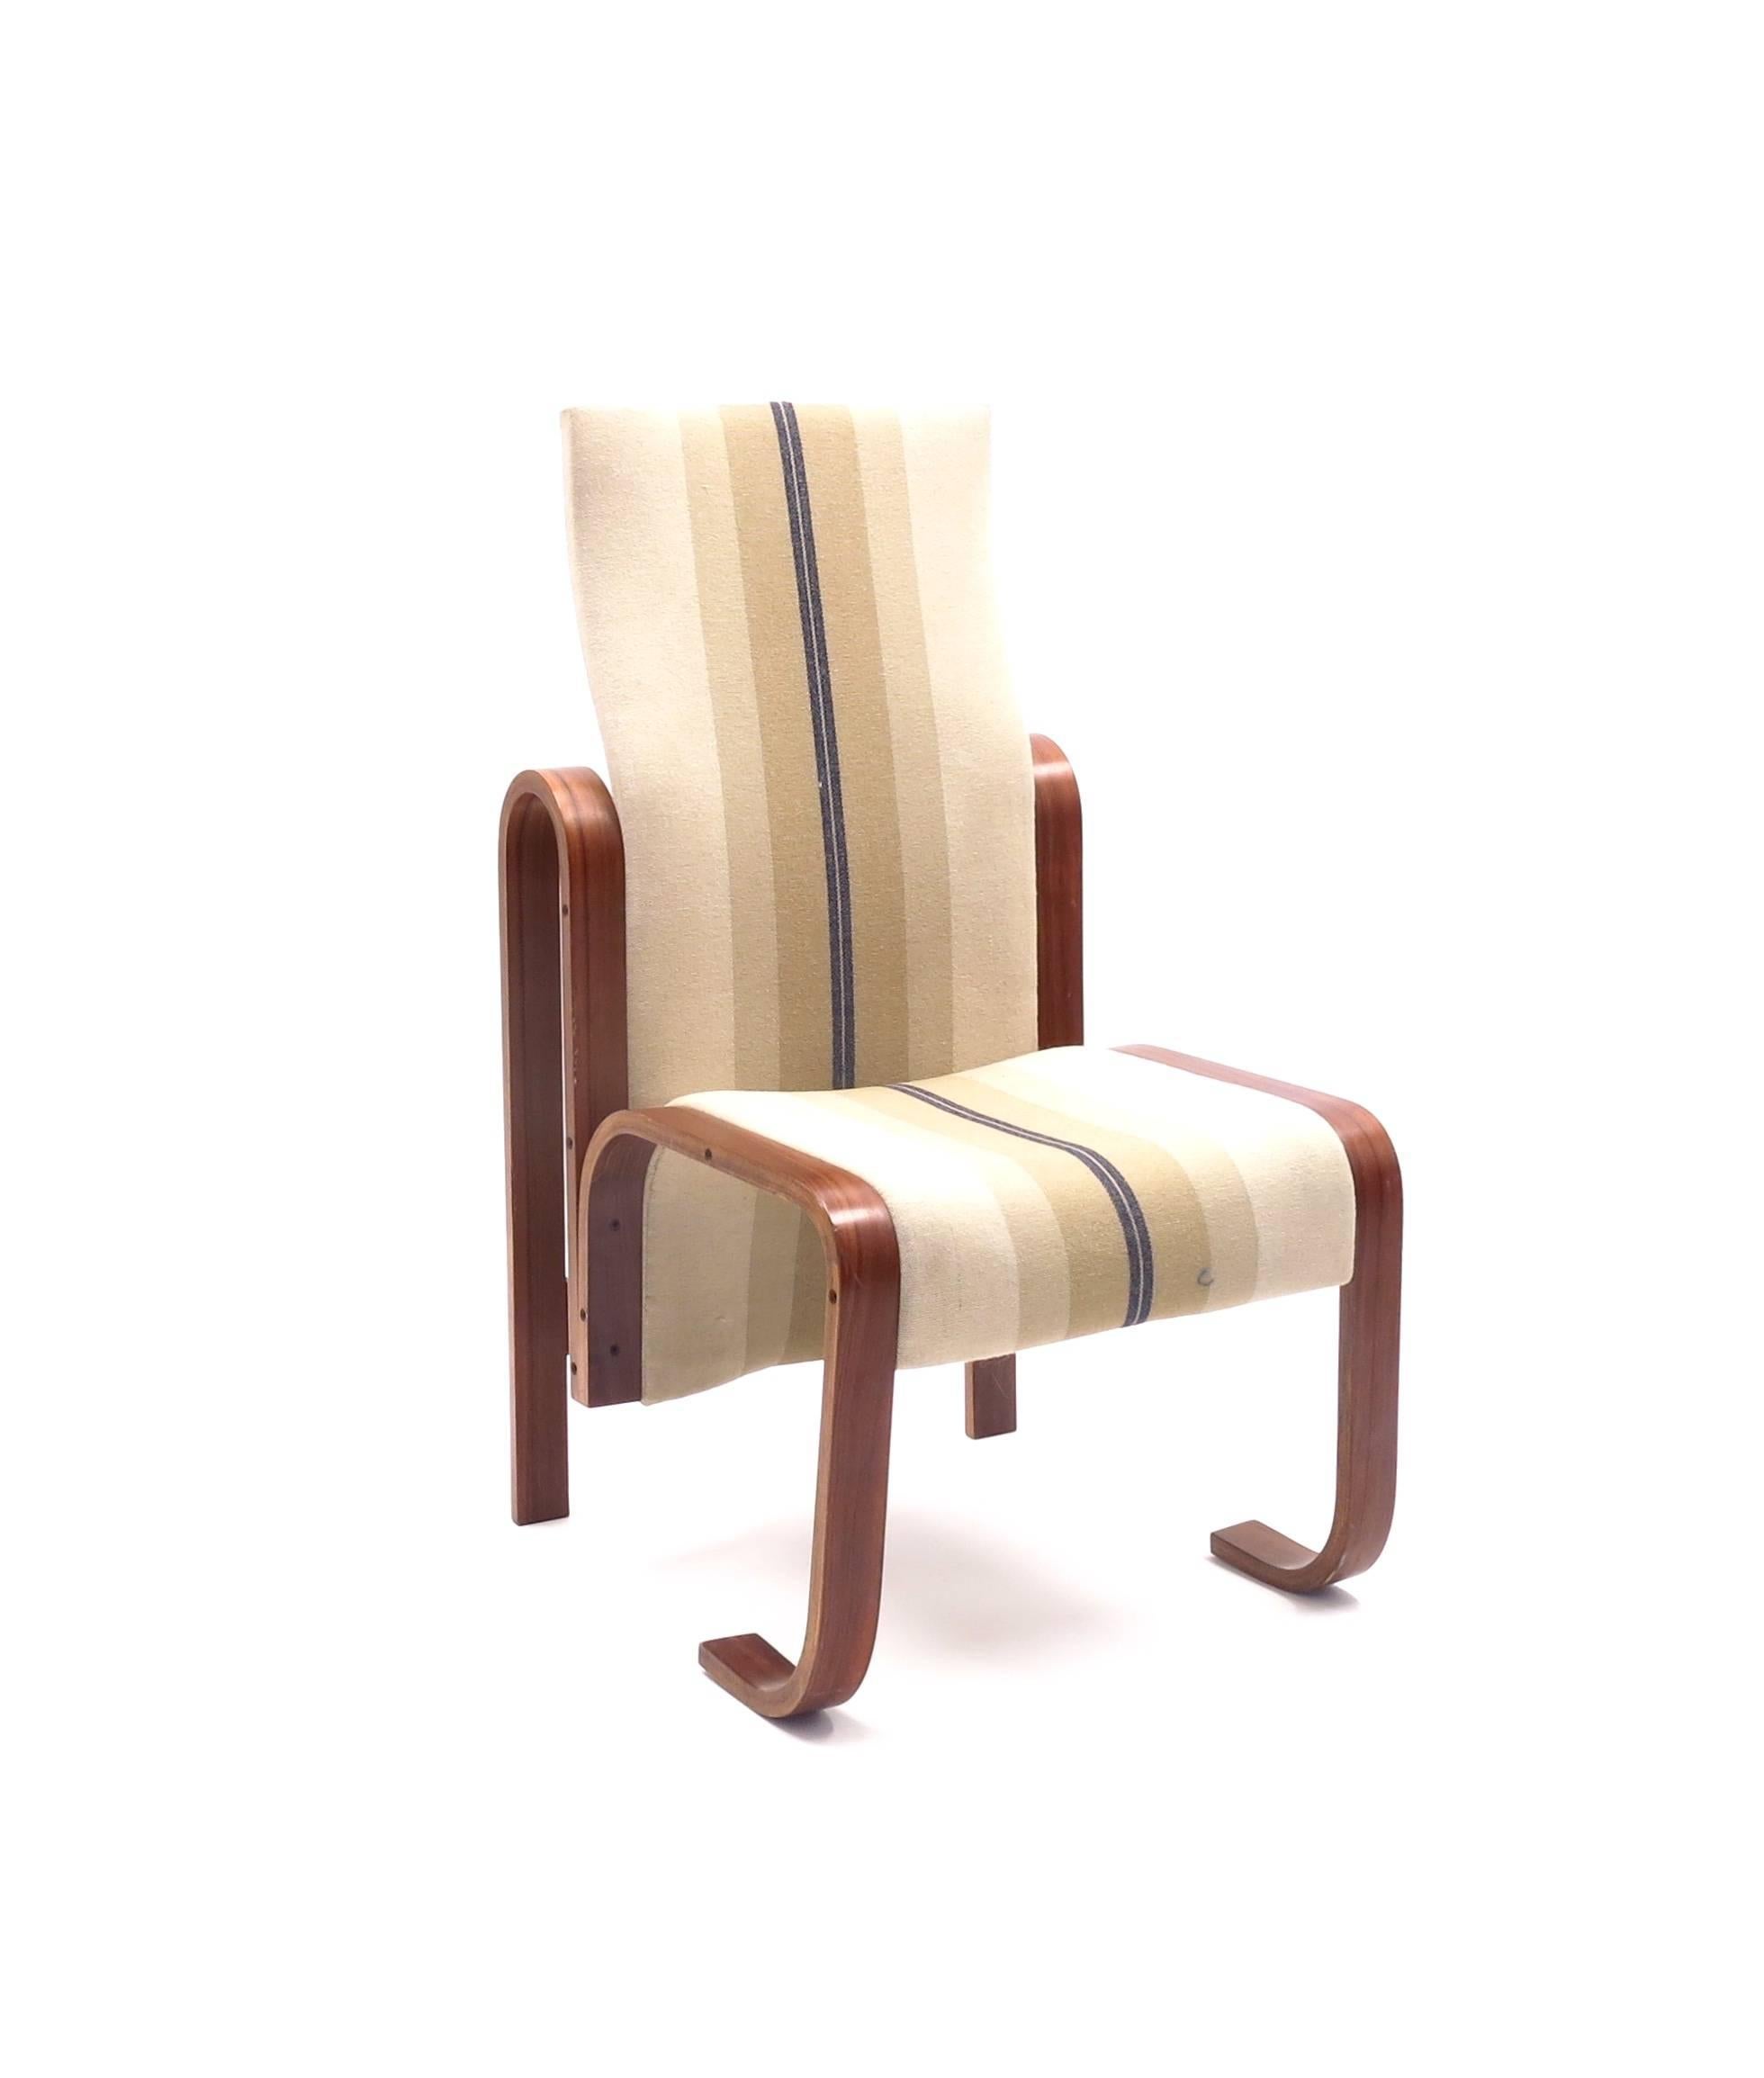 This chair was designed by Jan Bocan, the award-winning architect behind the Czechoslovakian embassy in Stockholm that was built in the late 1960s and early 1970s in a Brutalist style and was finished in 1972. He also designed all the furniture,